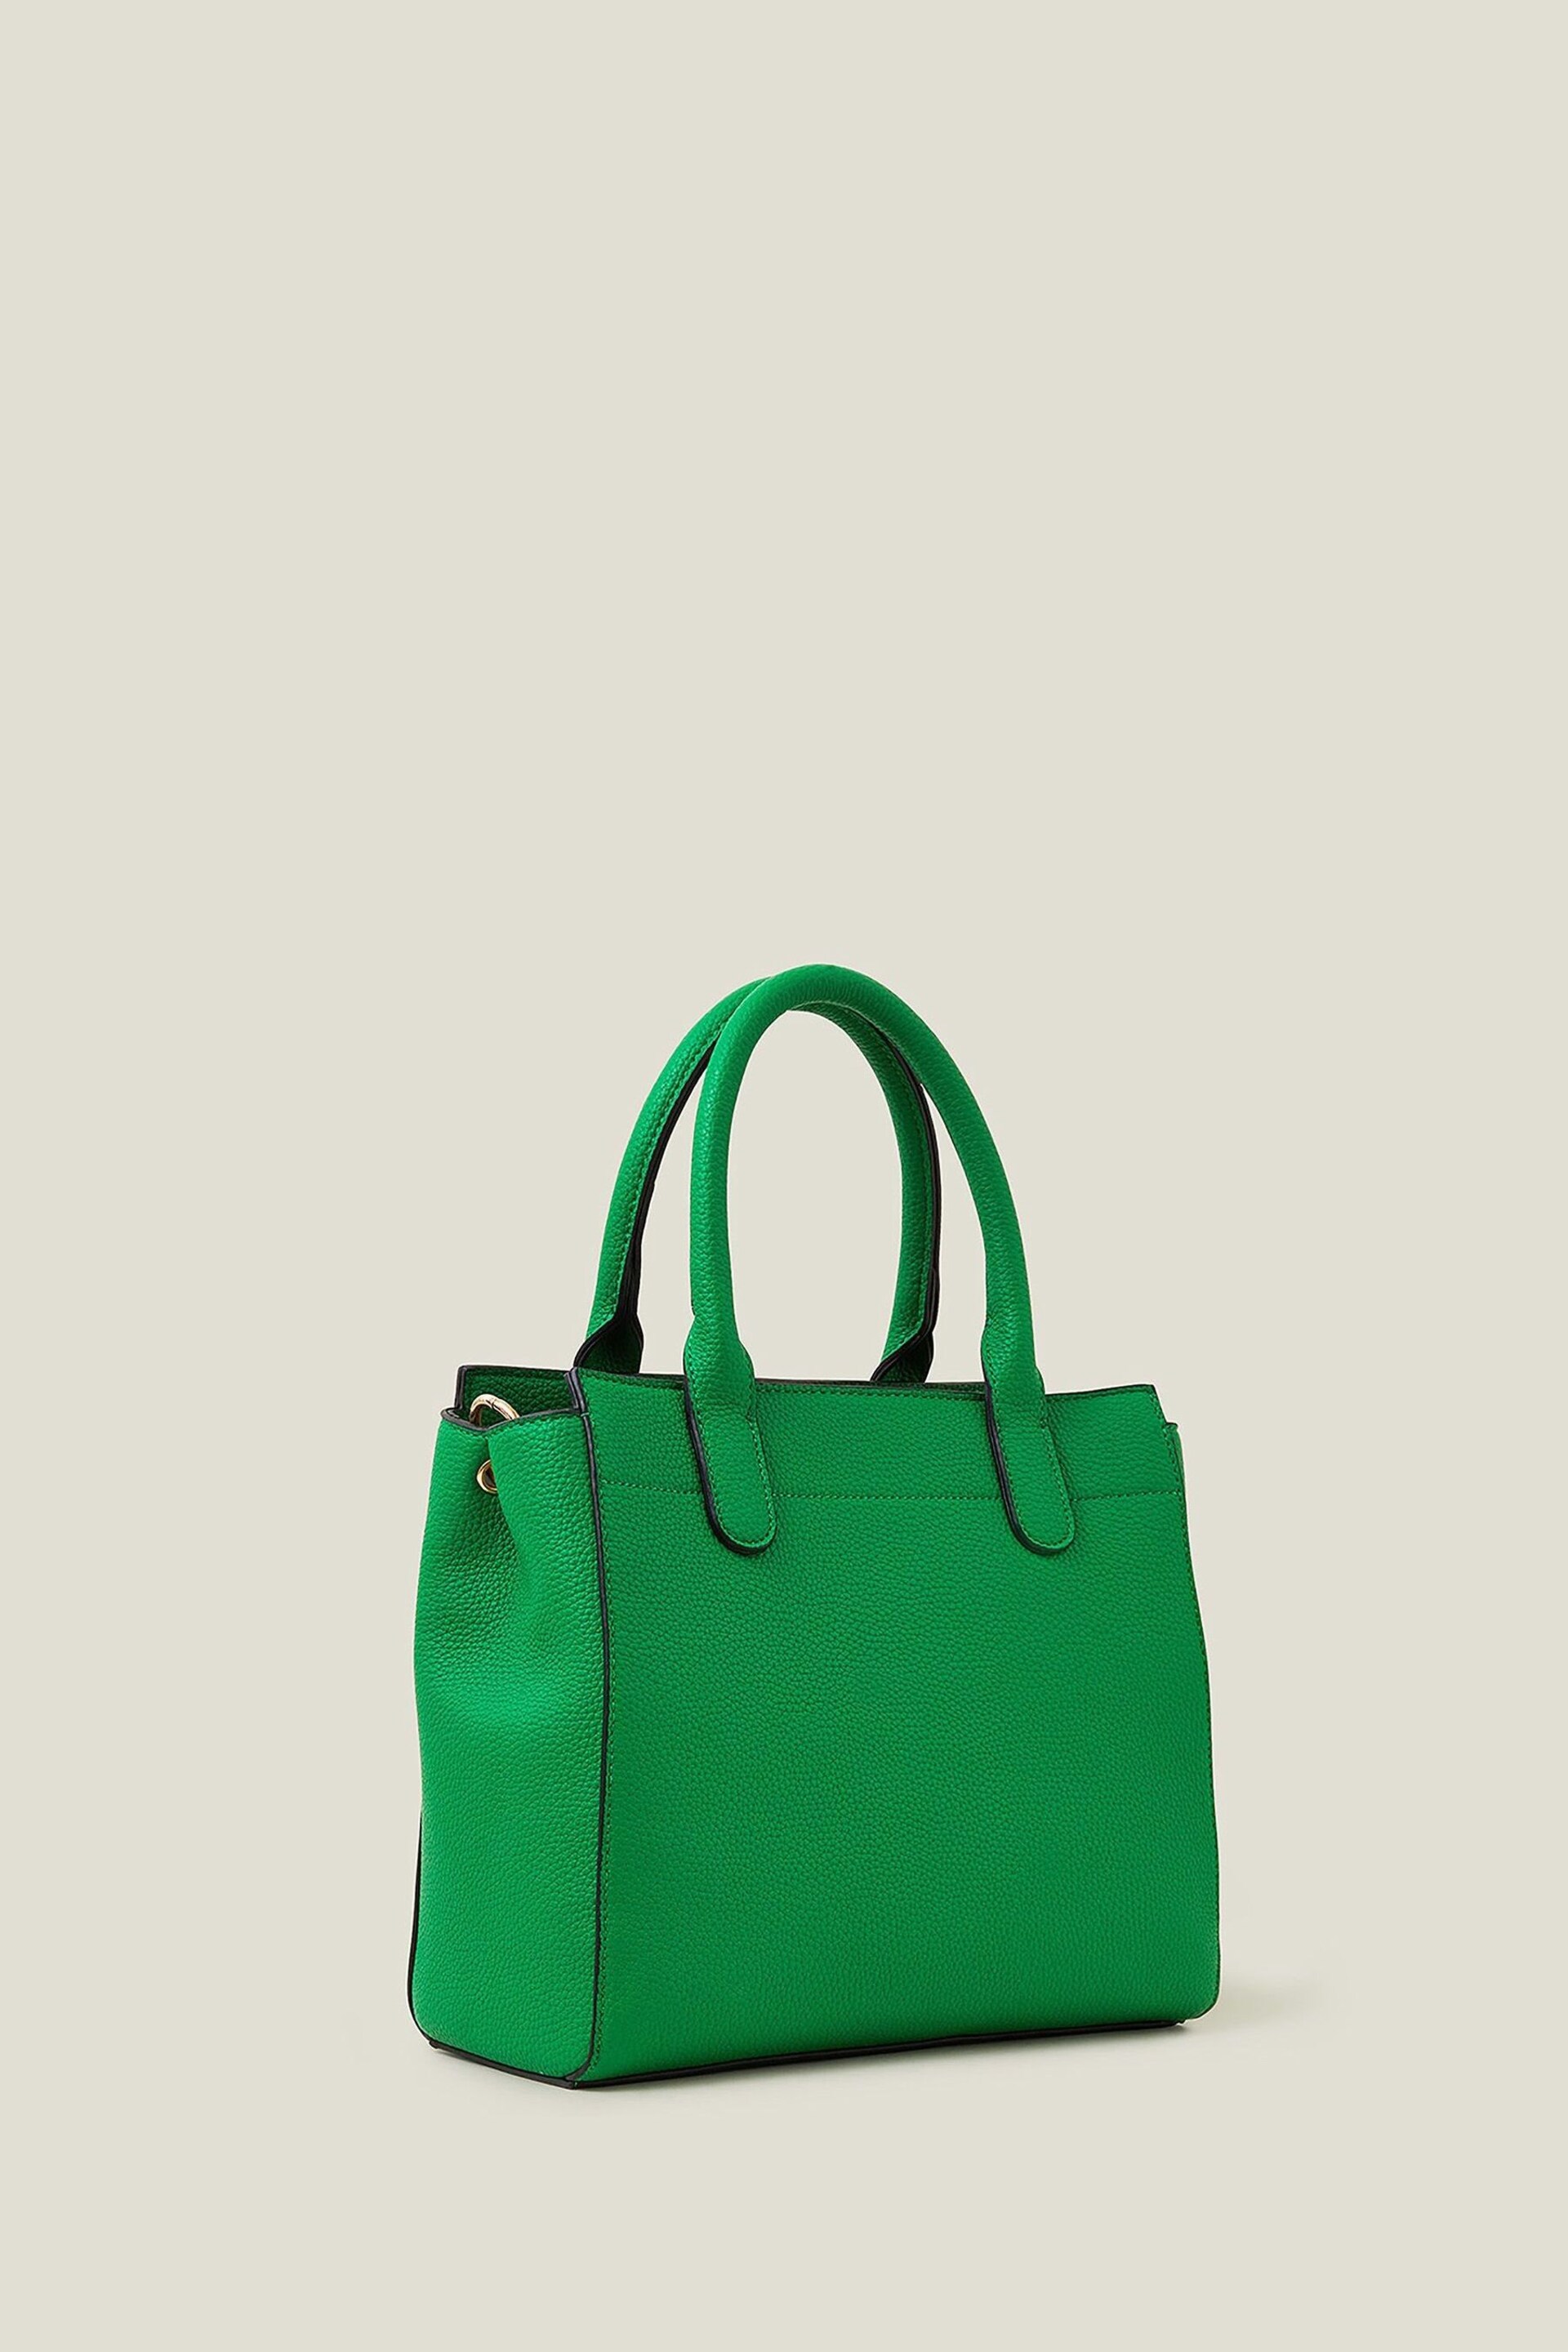 Accessorize Green Handheld Bag with Webbing Strap - Image 3 of 4